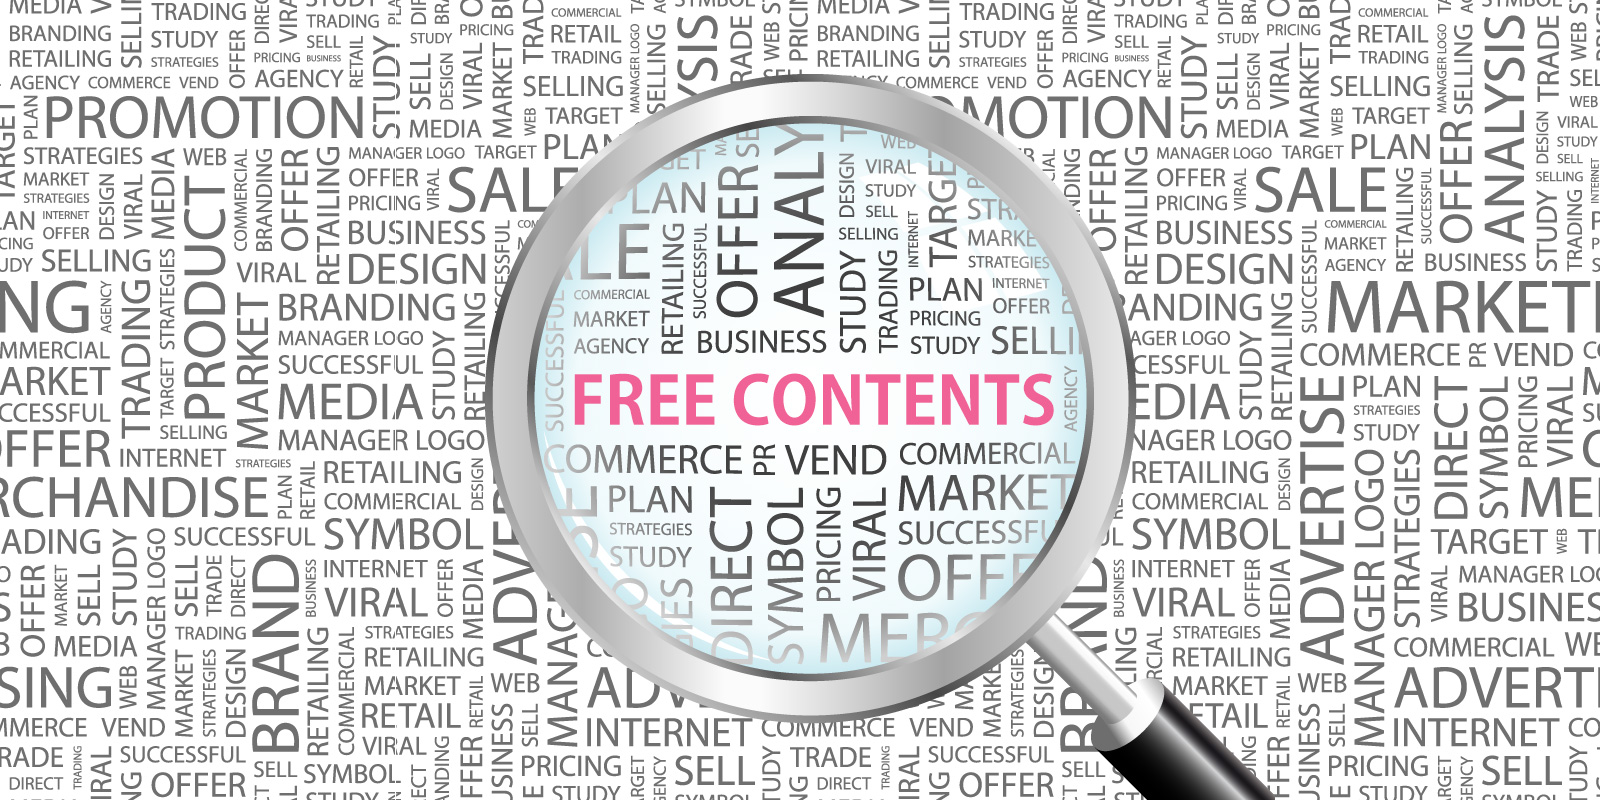 free_contents